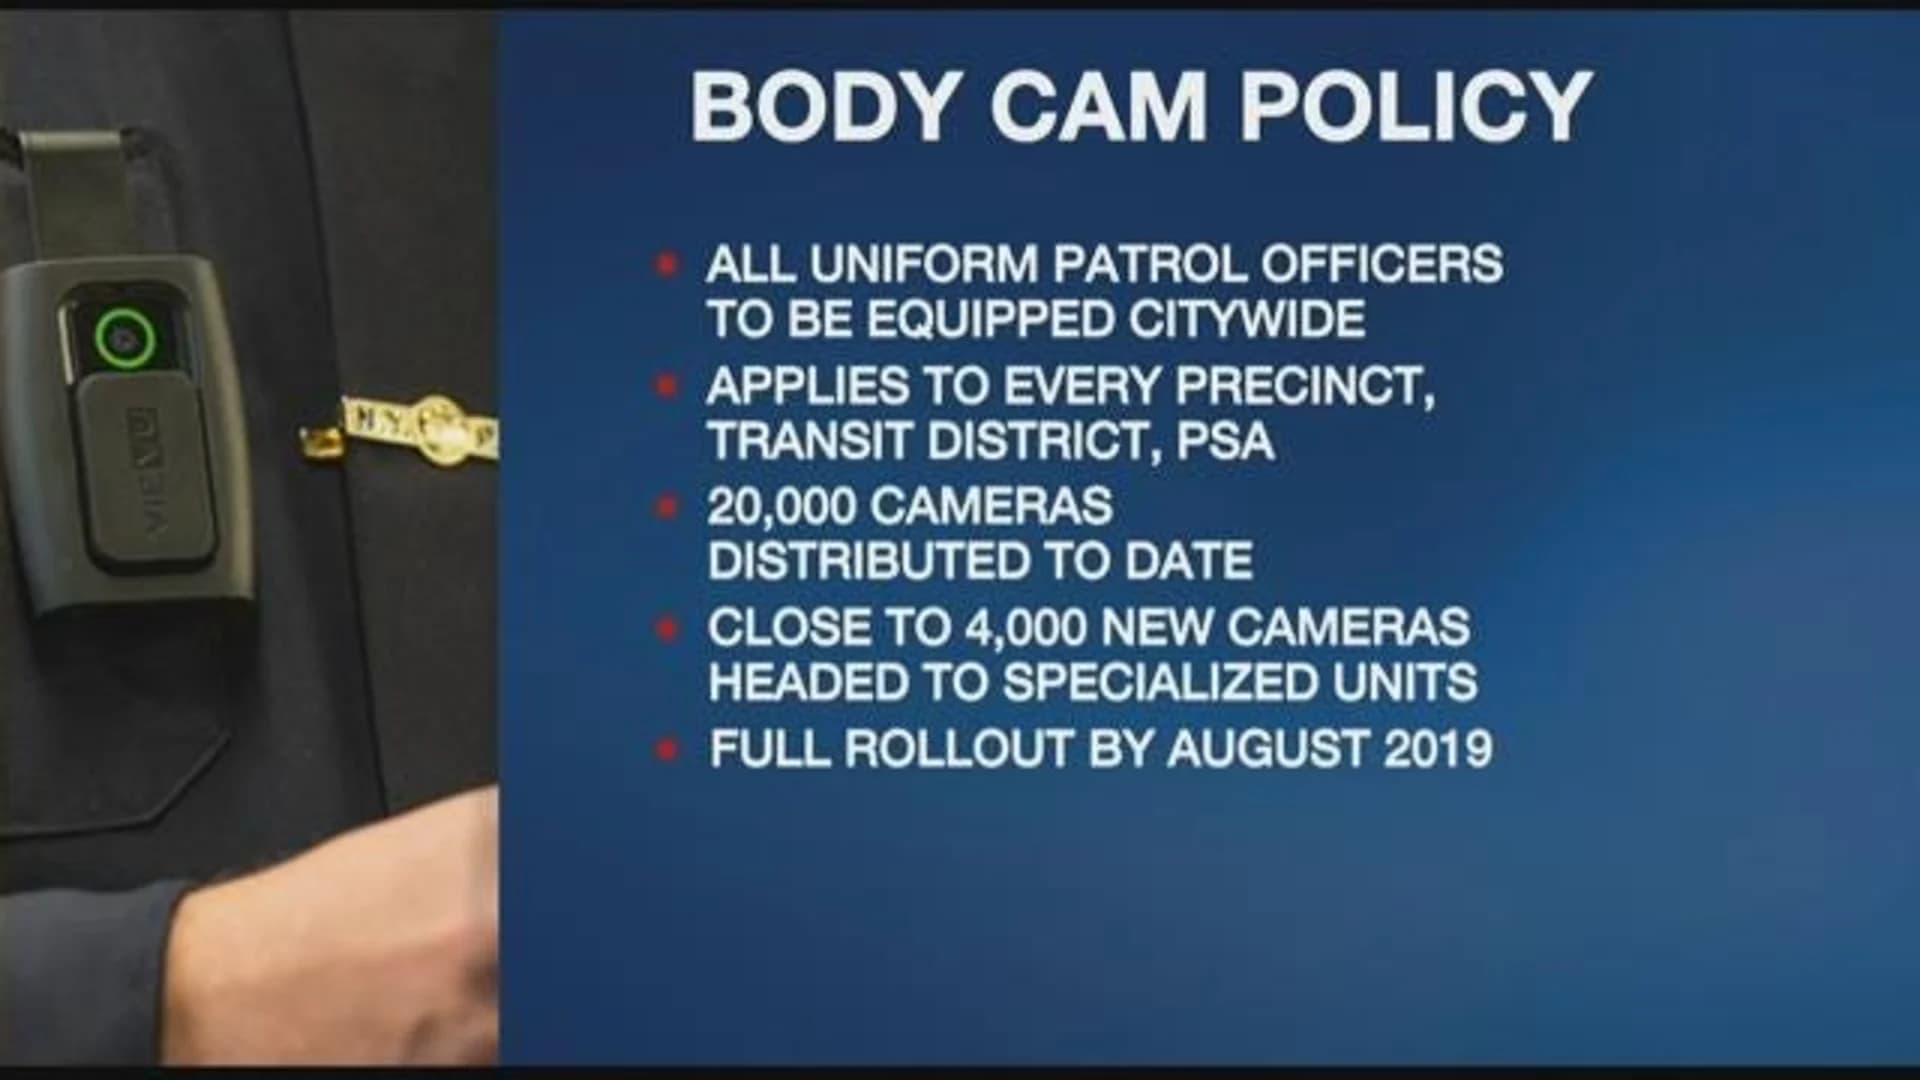 NYPD: All uniformed patrol officers to have body cams